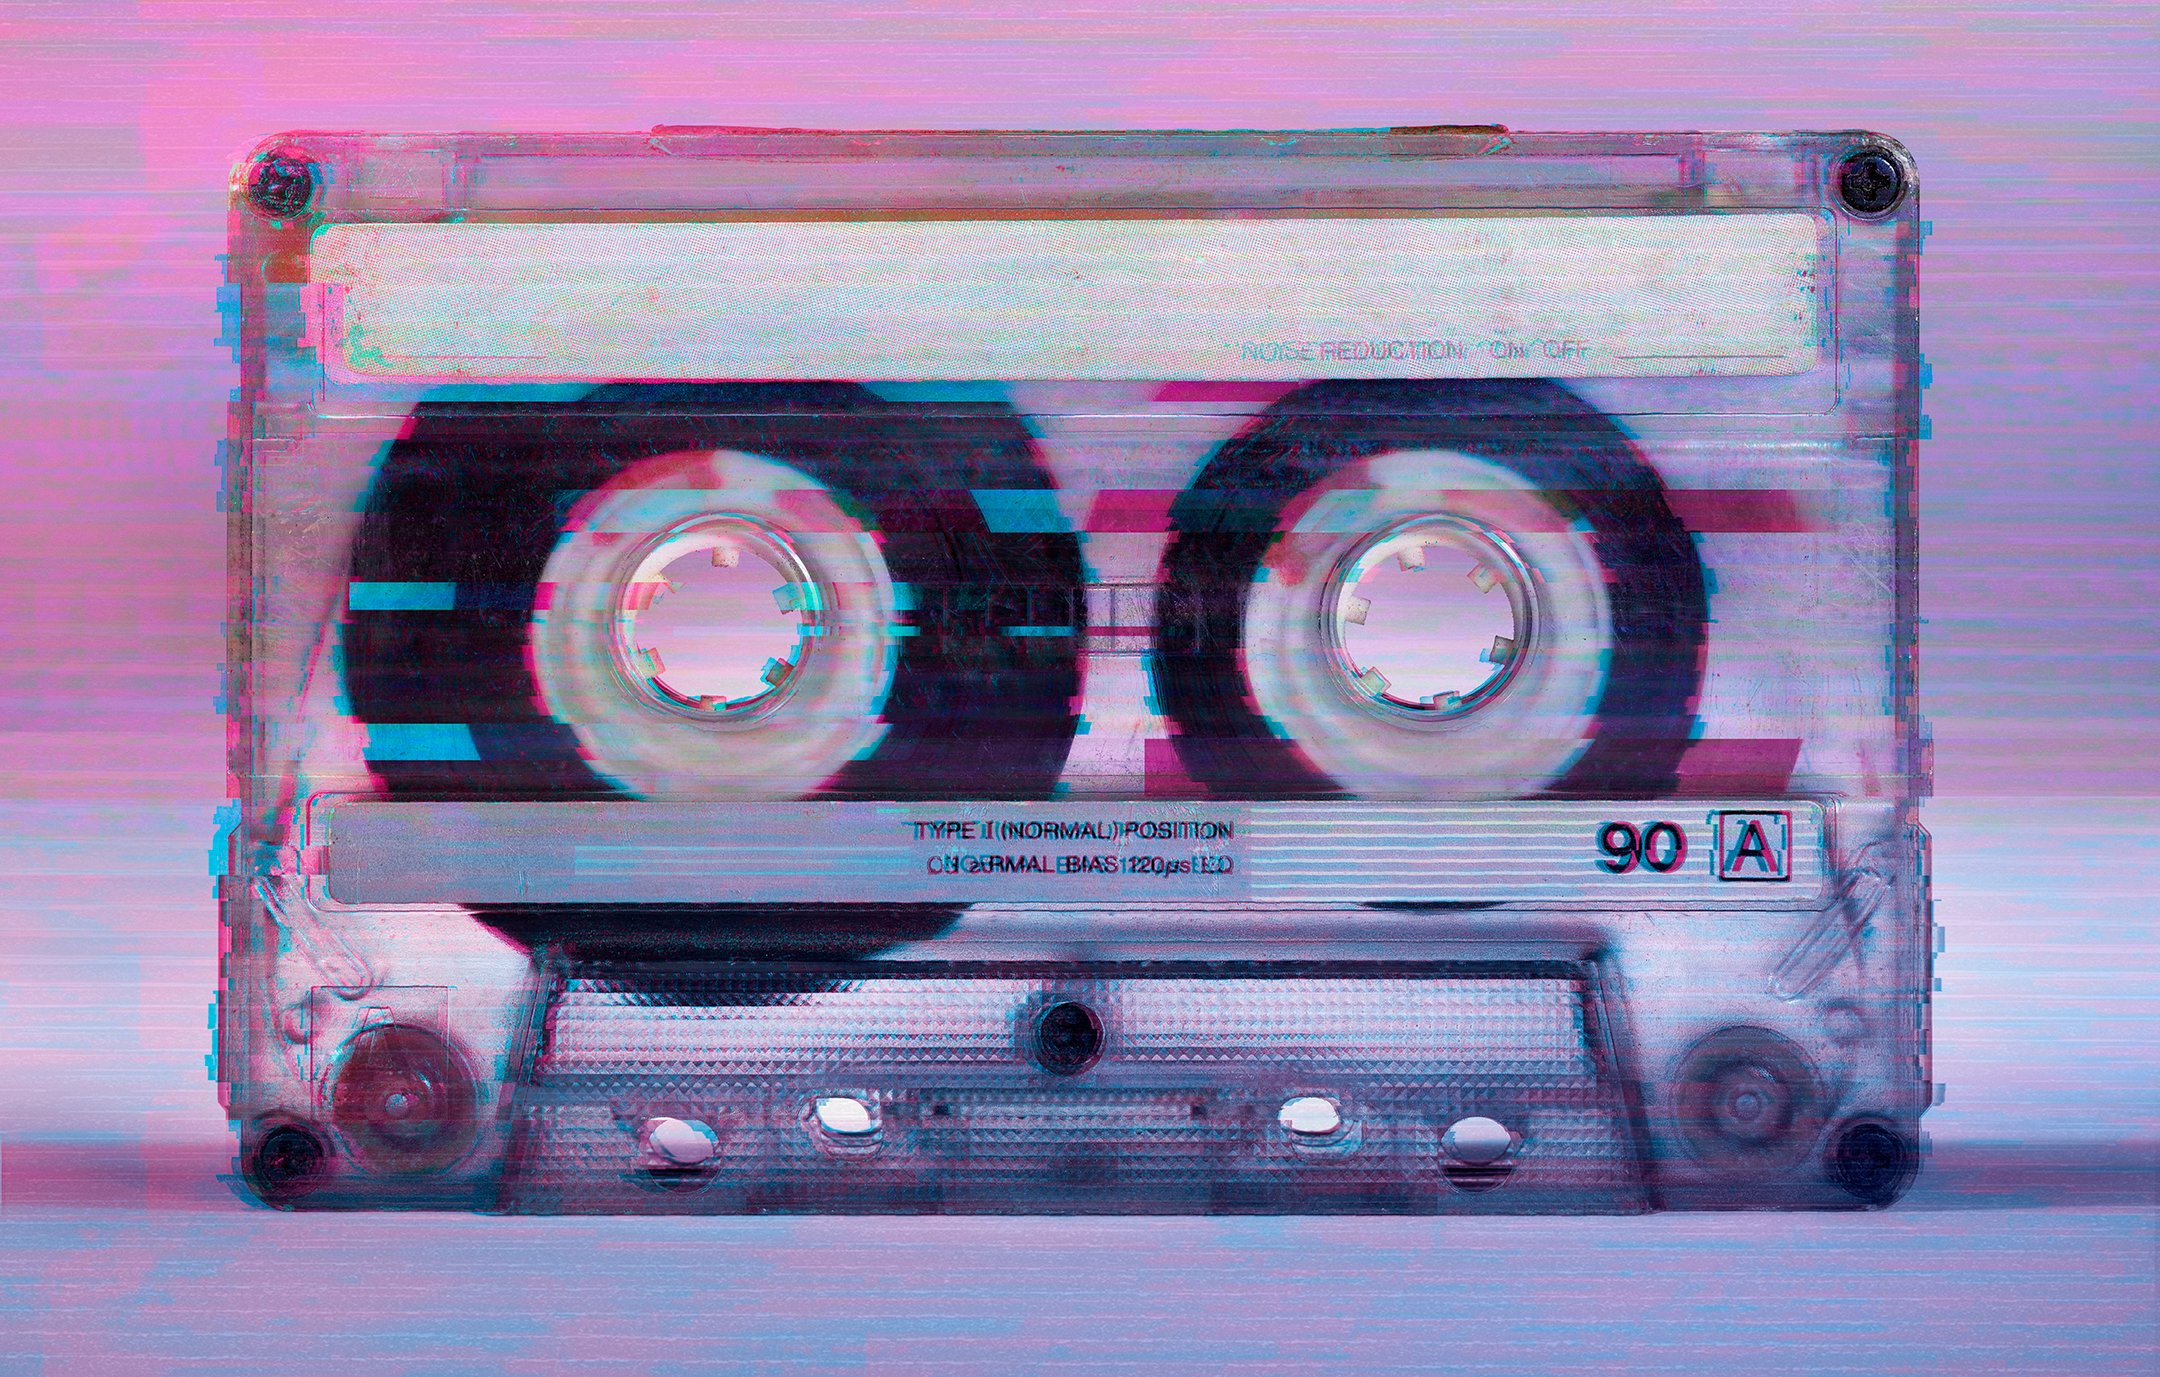 Frontal view of a cassette audio tape with glitch vhs effect